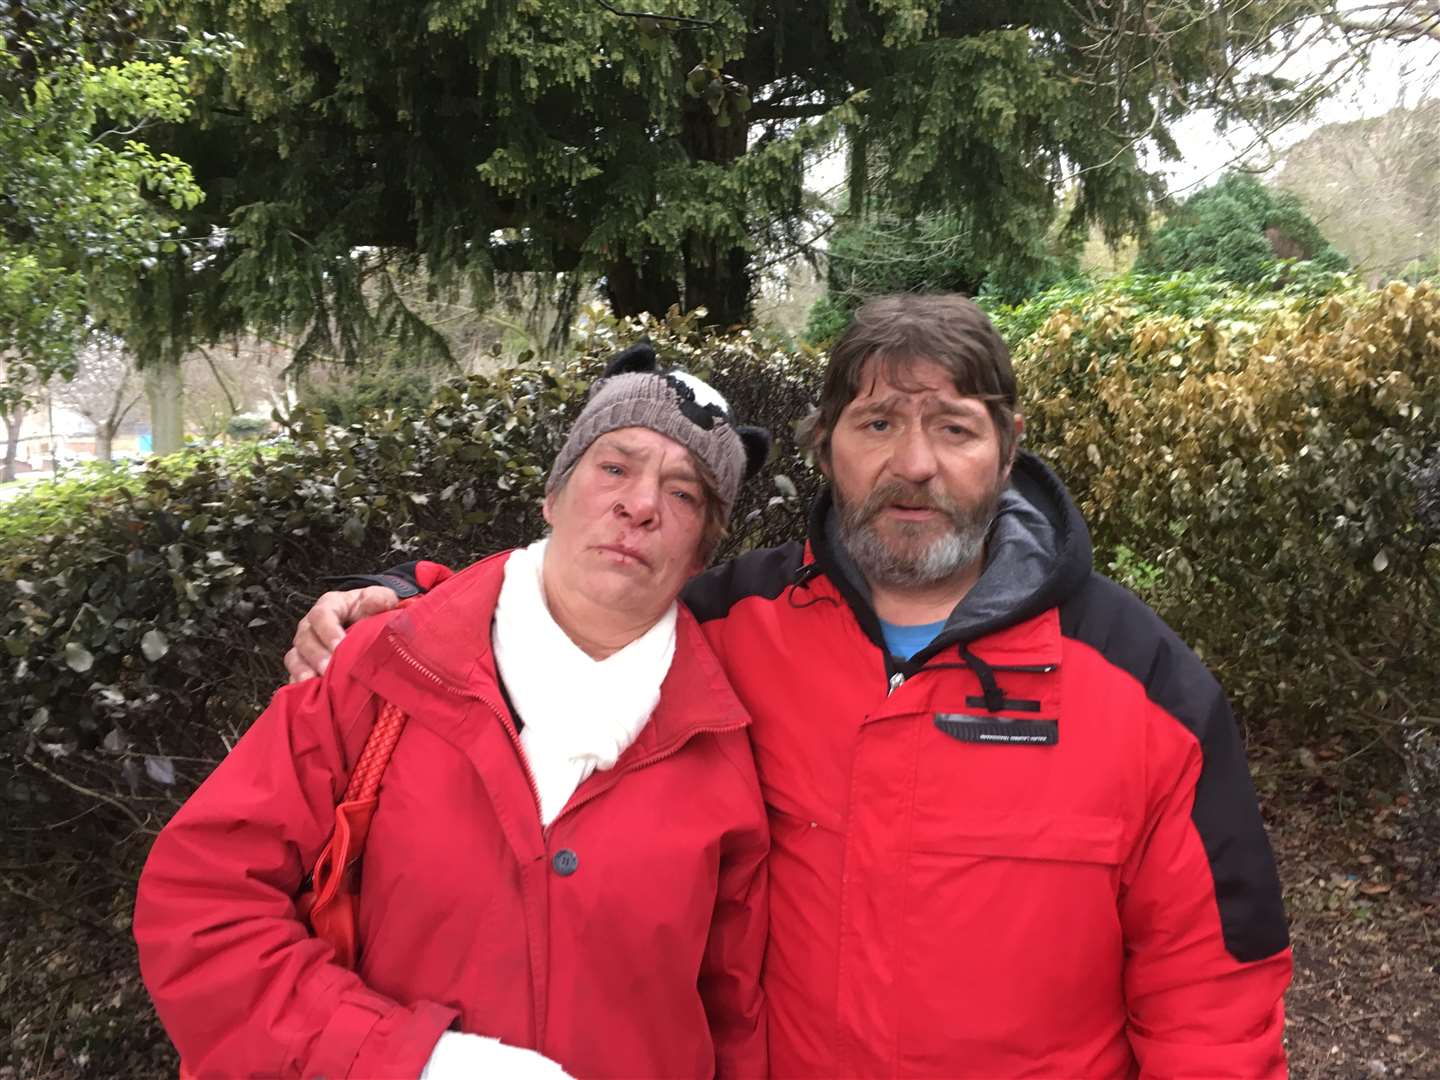 Rose Darke and Russell Whiteman were badly burned when their tent caught alight